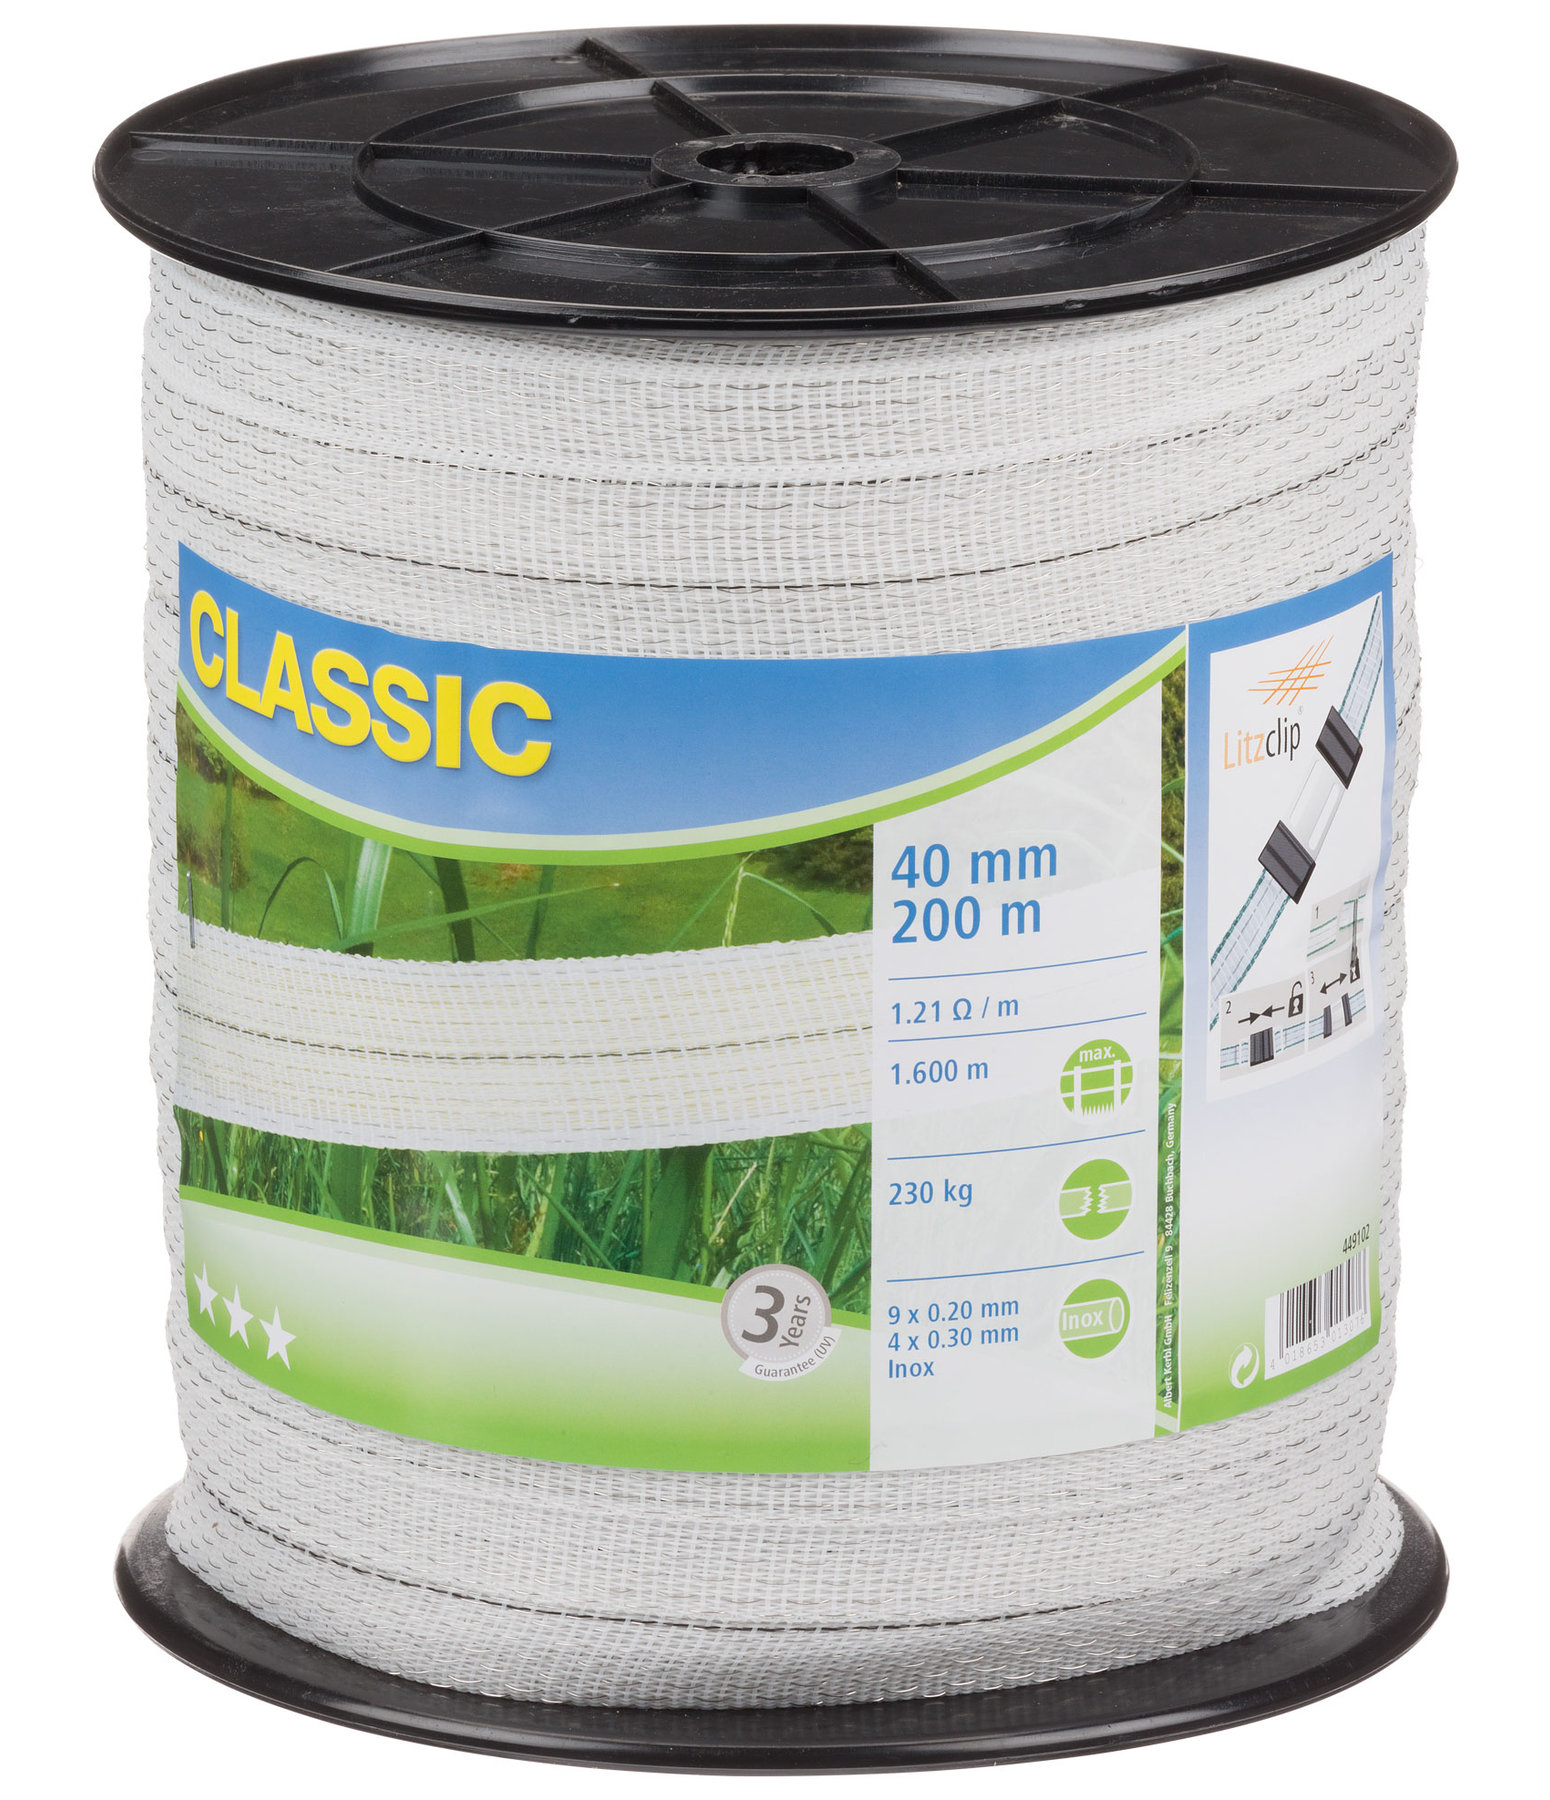 Suregreen Electric Fence Tape 200m Rolls 20mm and 40mm Wide Equestrian Fencing 